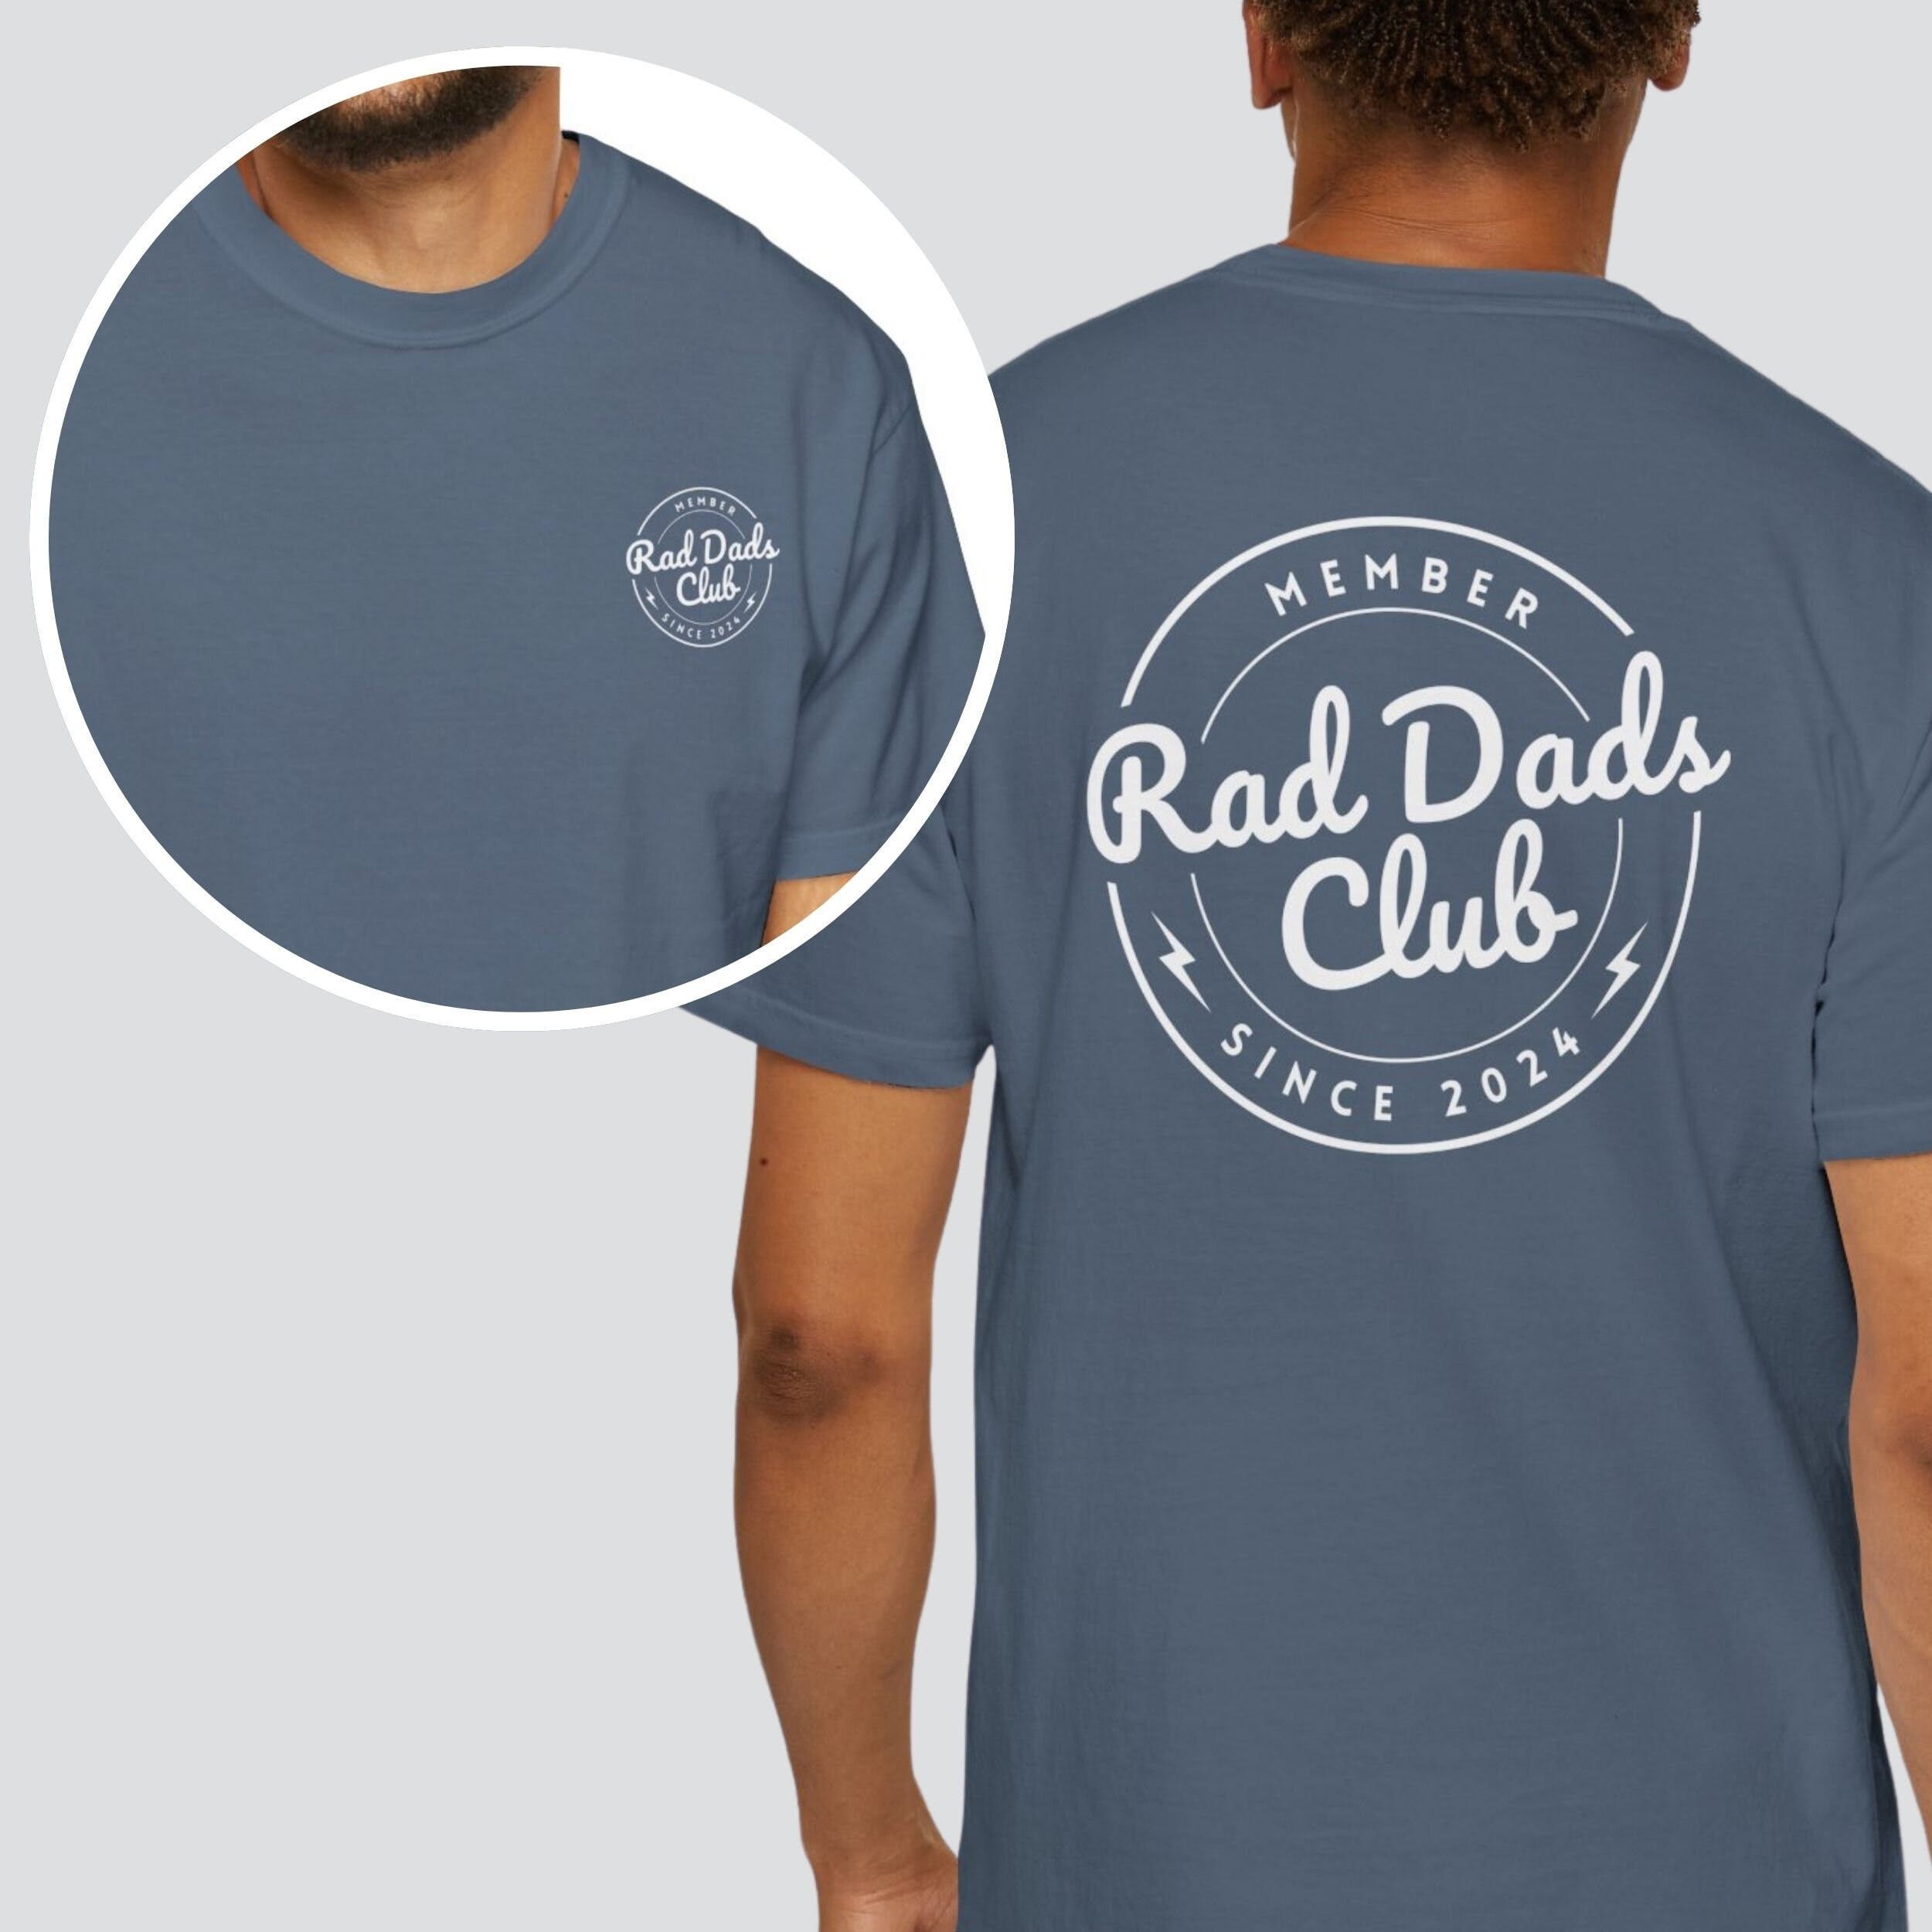 Personalized Rad Dads Club Comfort Colors Tee, Cool Dads Club Shirt, Funny Husband Shirt, Father